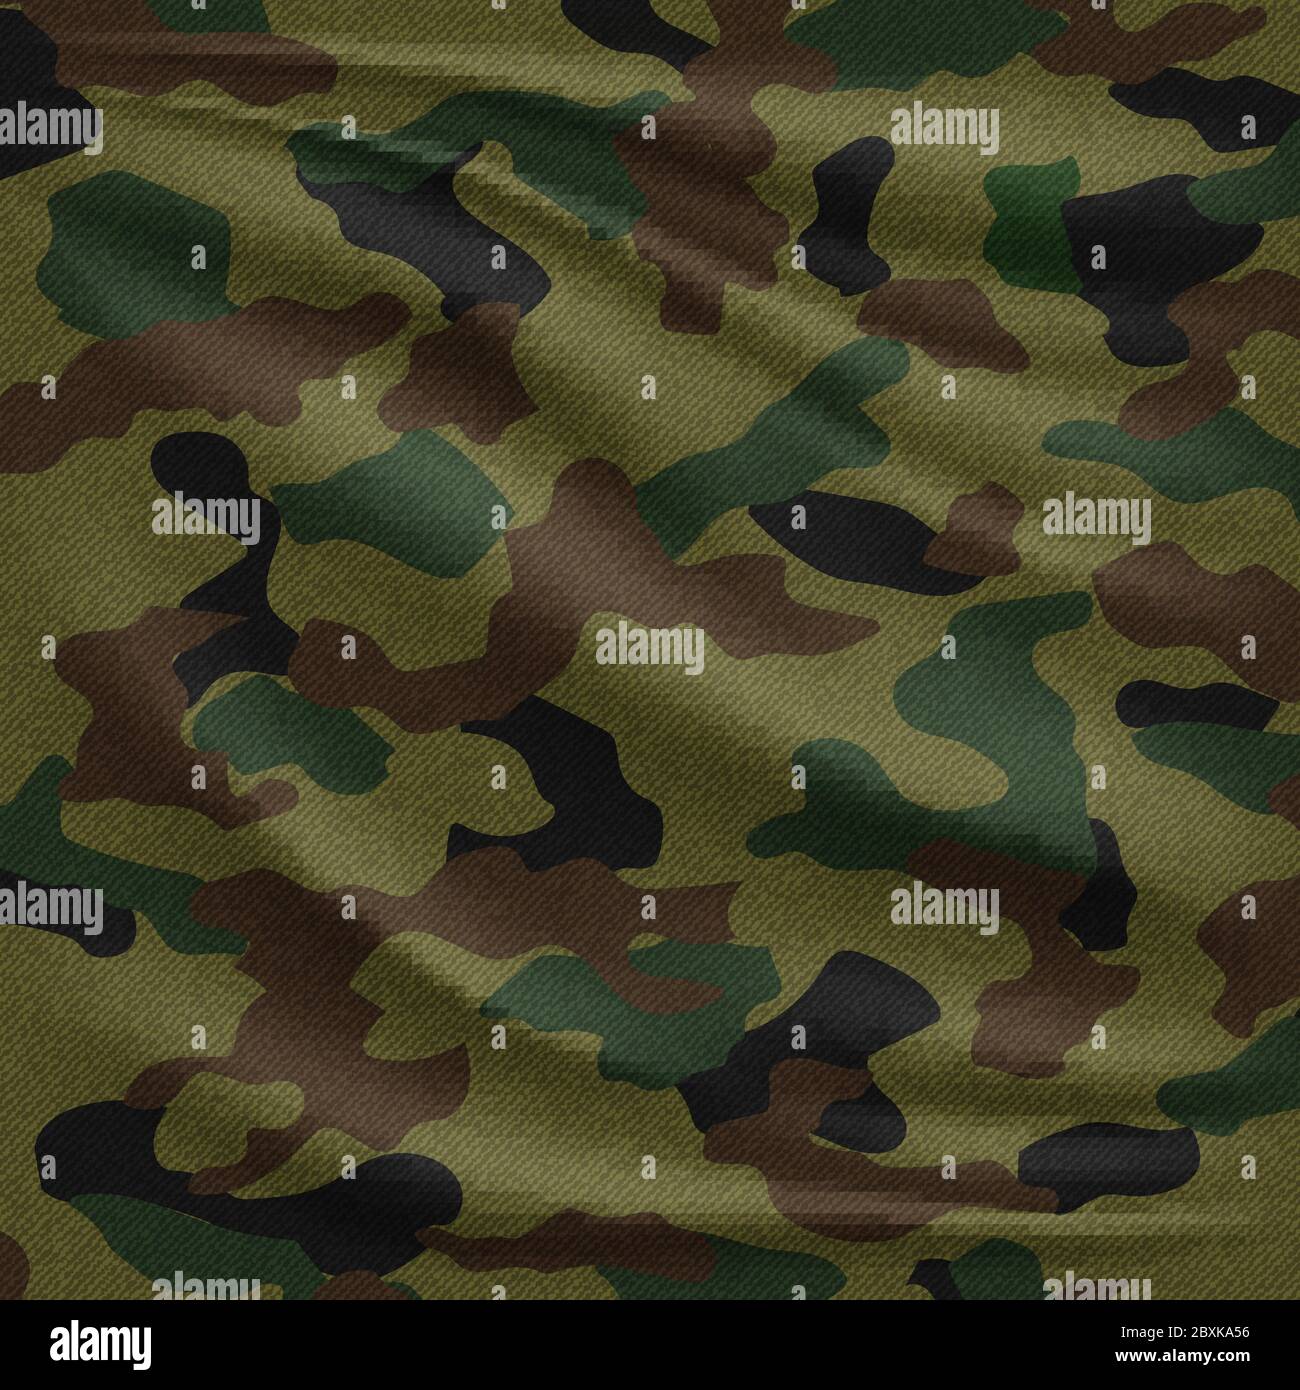 Realistic camouflage fabric pattern. Military uniform vector texture Stock Vector